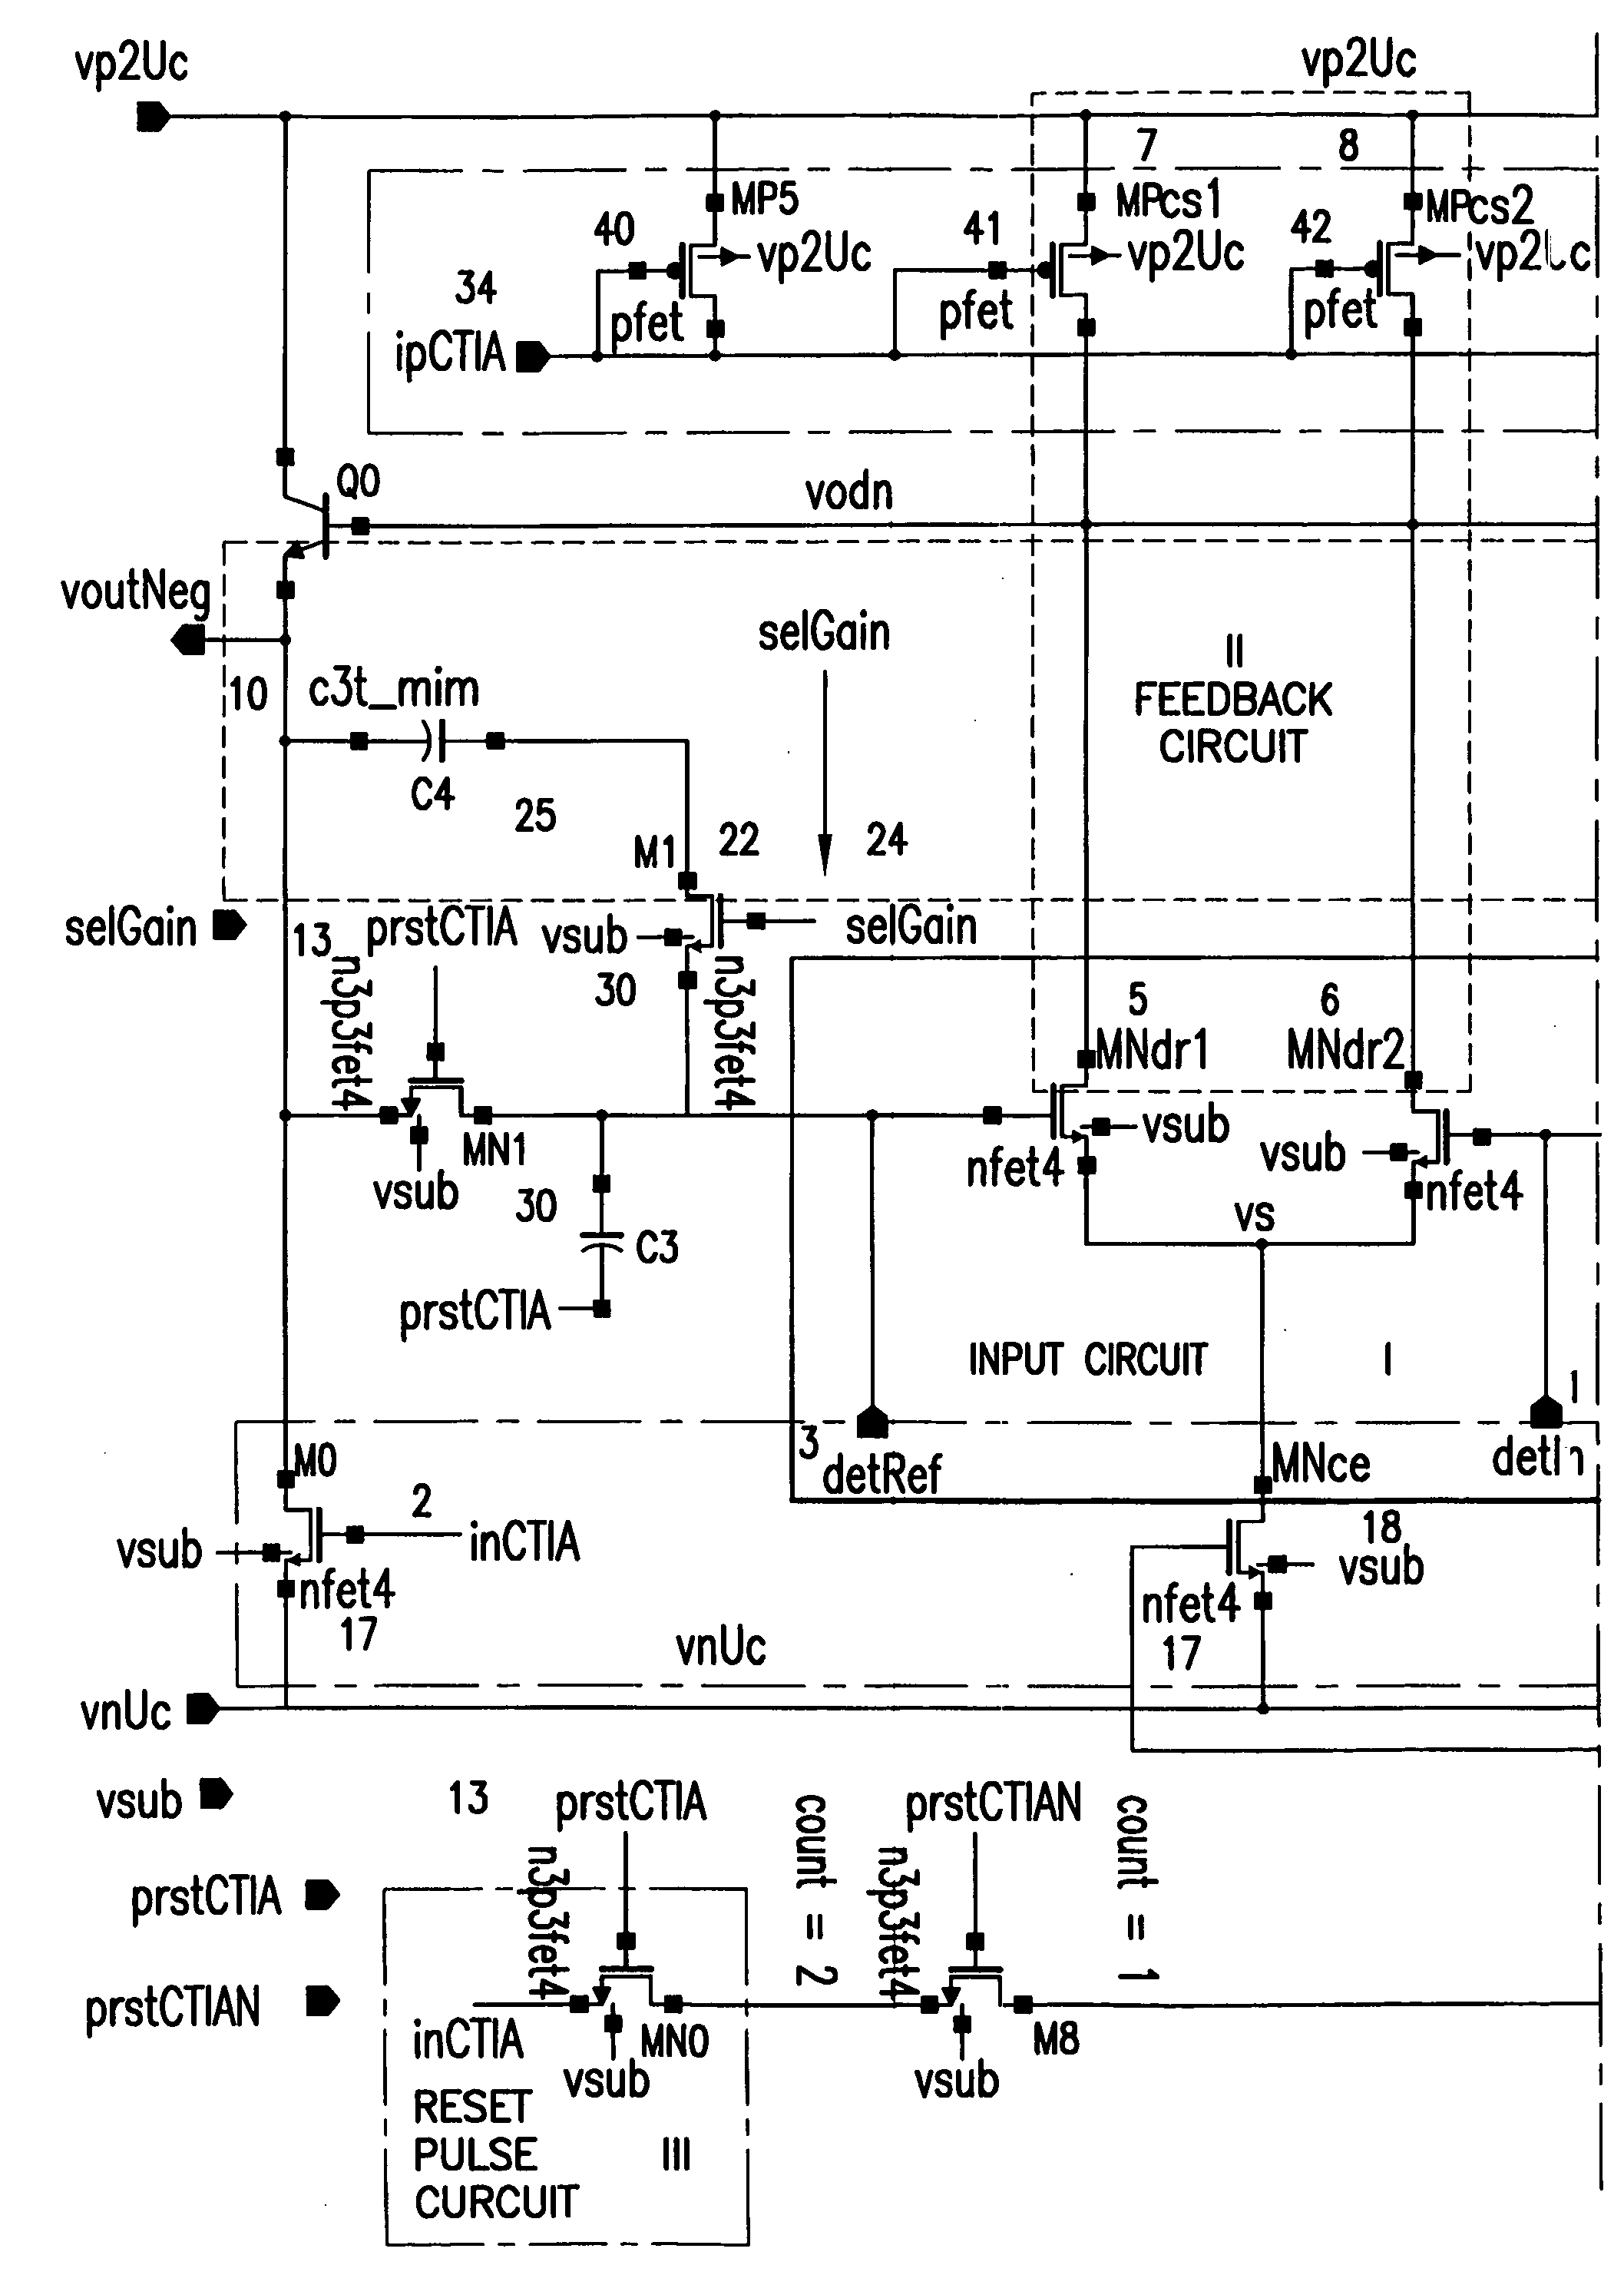 Low noise, low power and high bandwidth capacitive feedback trans-impedance amplifier with differential fet input and bipolar emitter follower feedback